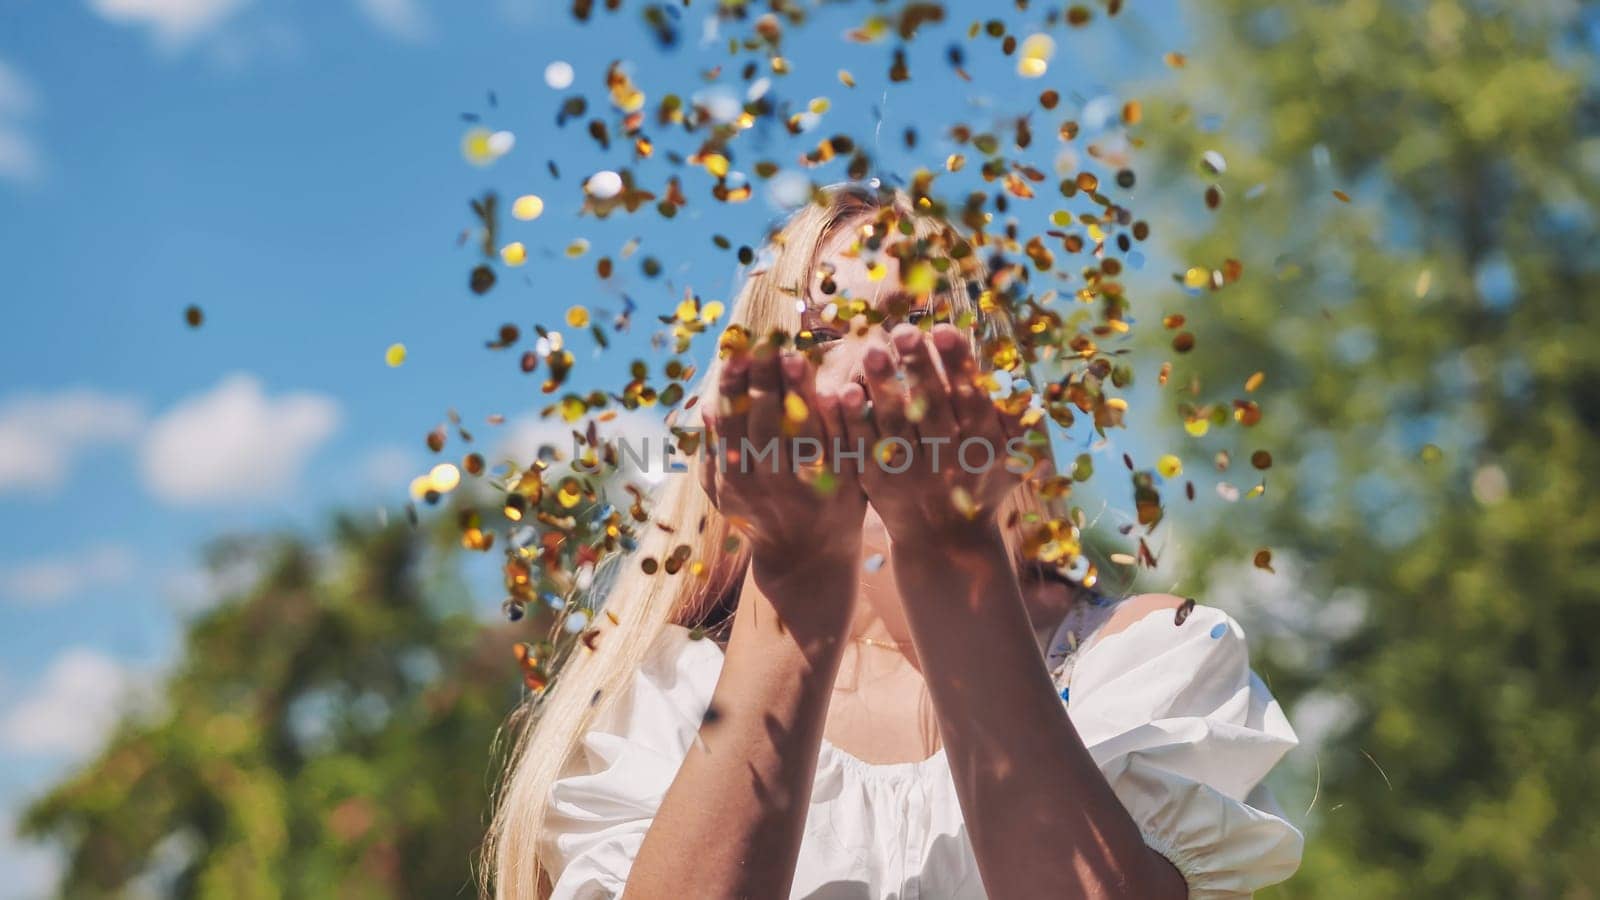 The girl blows a golden confetti out of her hands